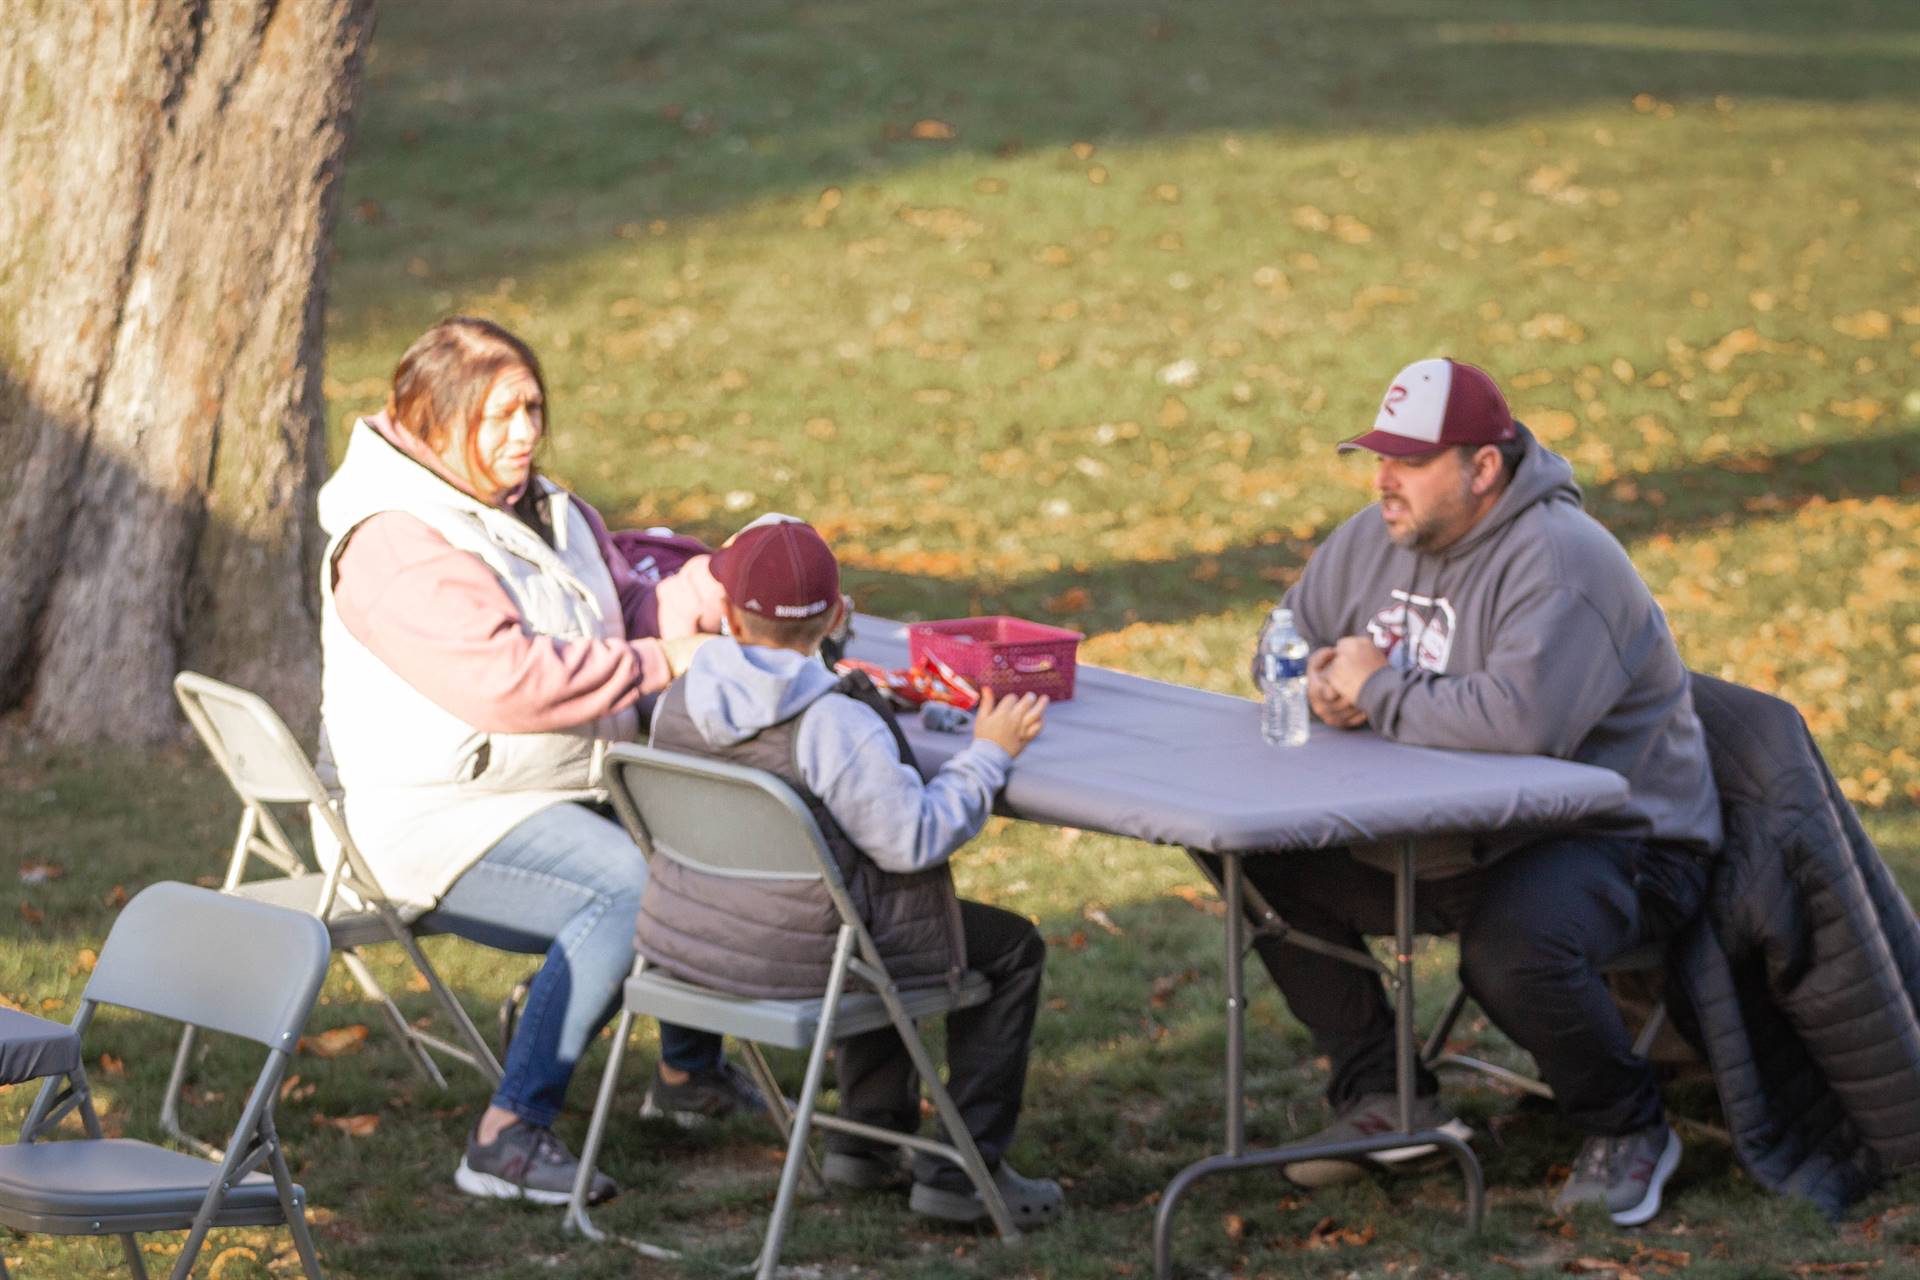 Rossford Alumni Tailgate - Family eating together.